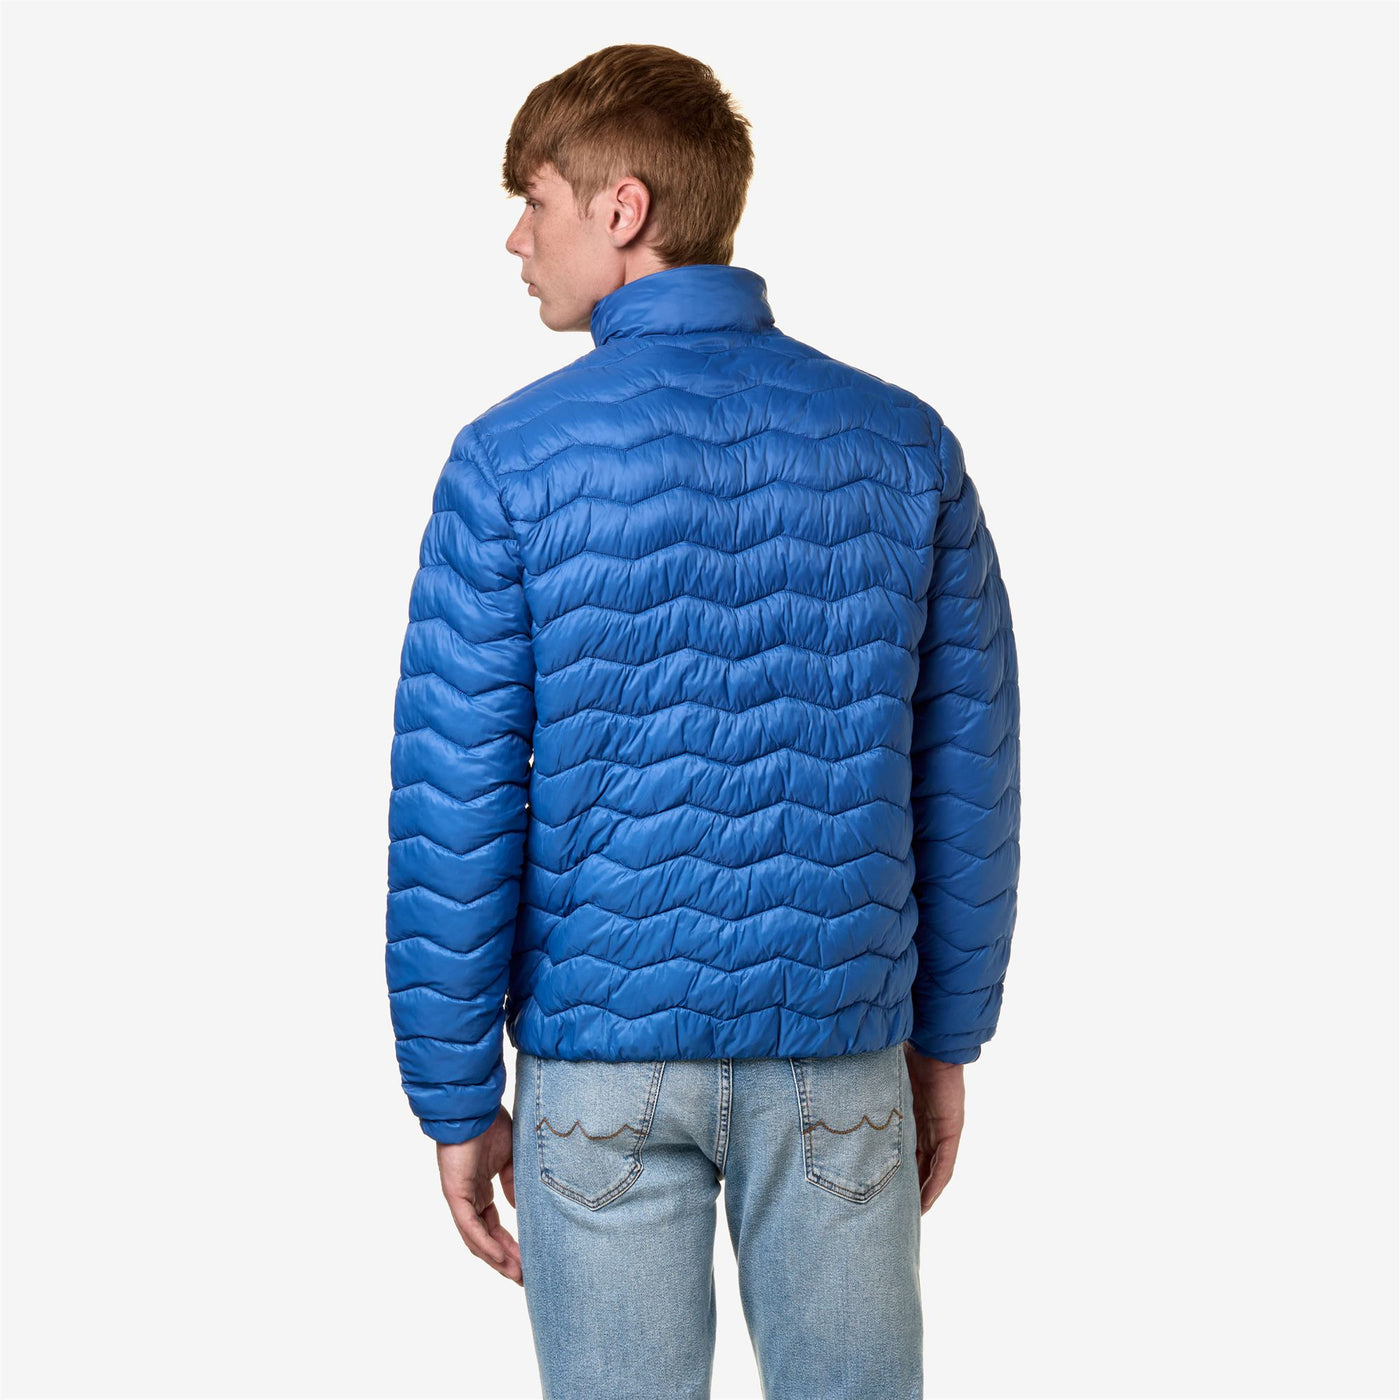 Jackets Man VALENTINE QUILTED WARM Short BLUE ROYAL MARINE Dressed Front Double		